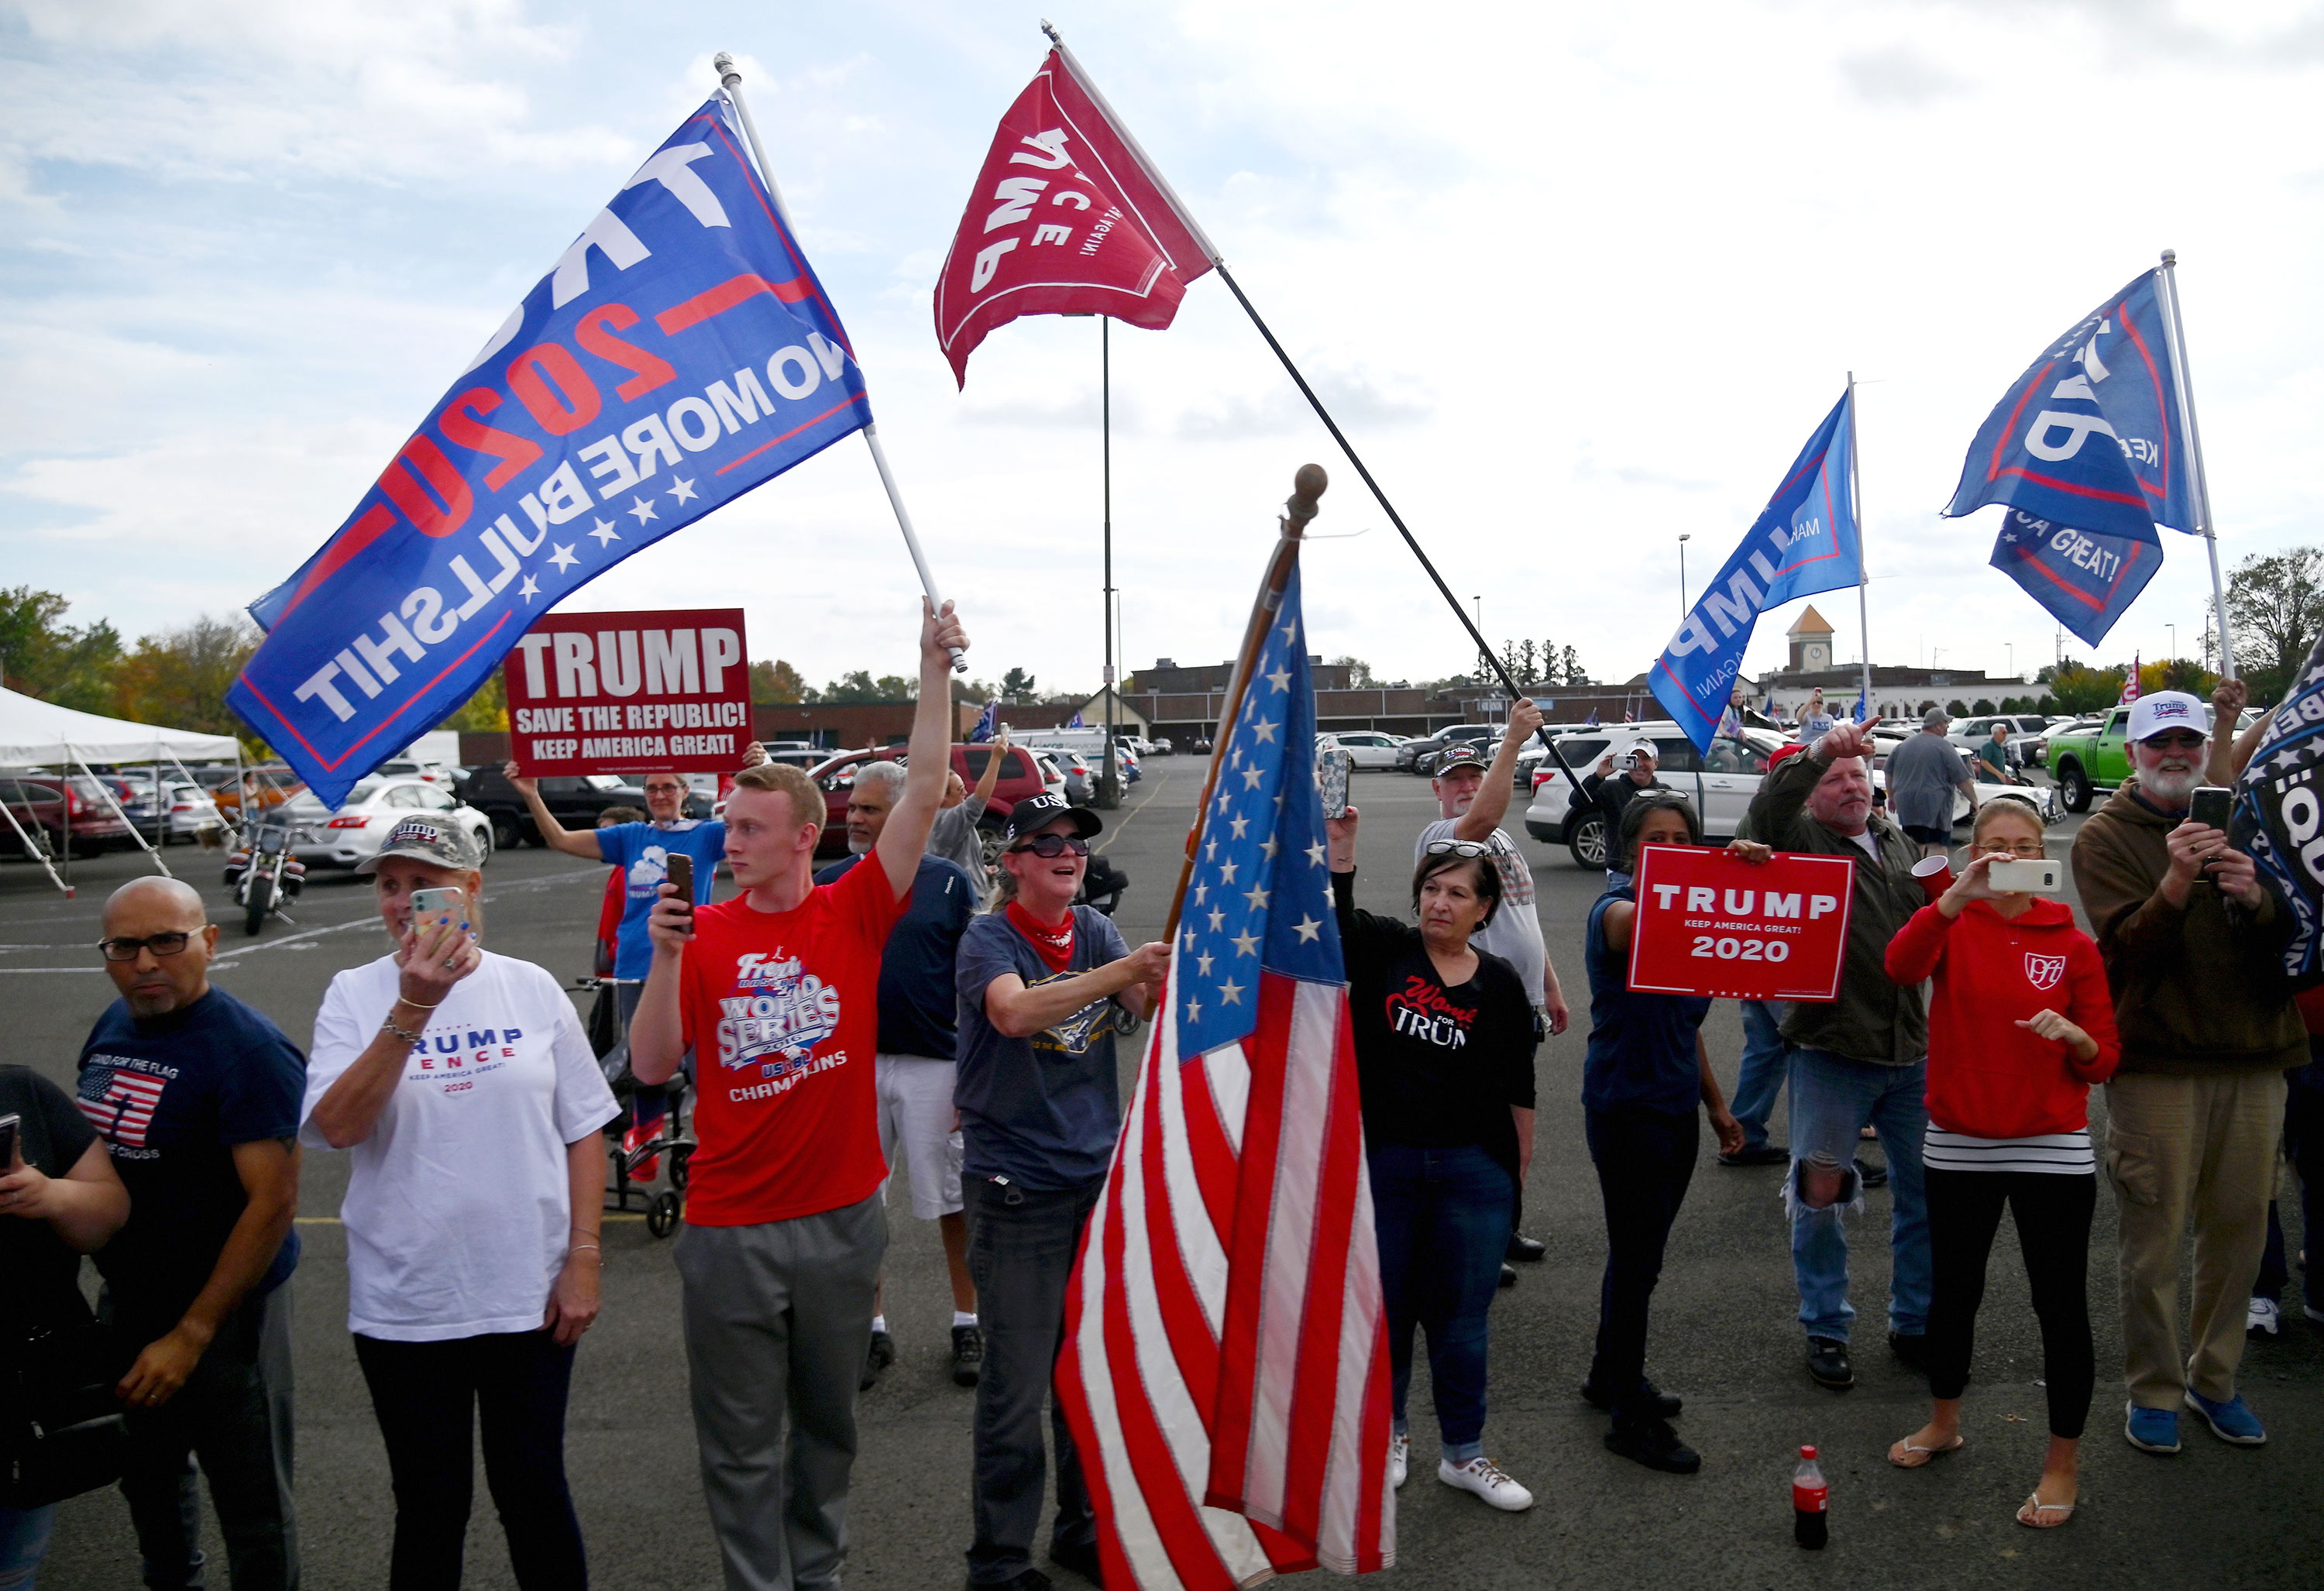 Donald Trump supporters gather at a drive-in rally for Joe Biden on October 24 in Bristol, Pennsylvania.